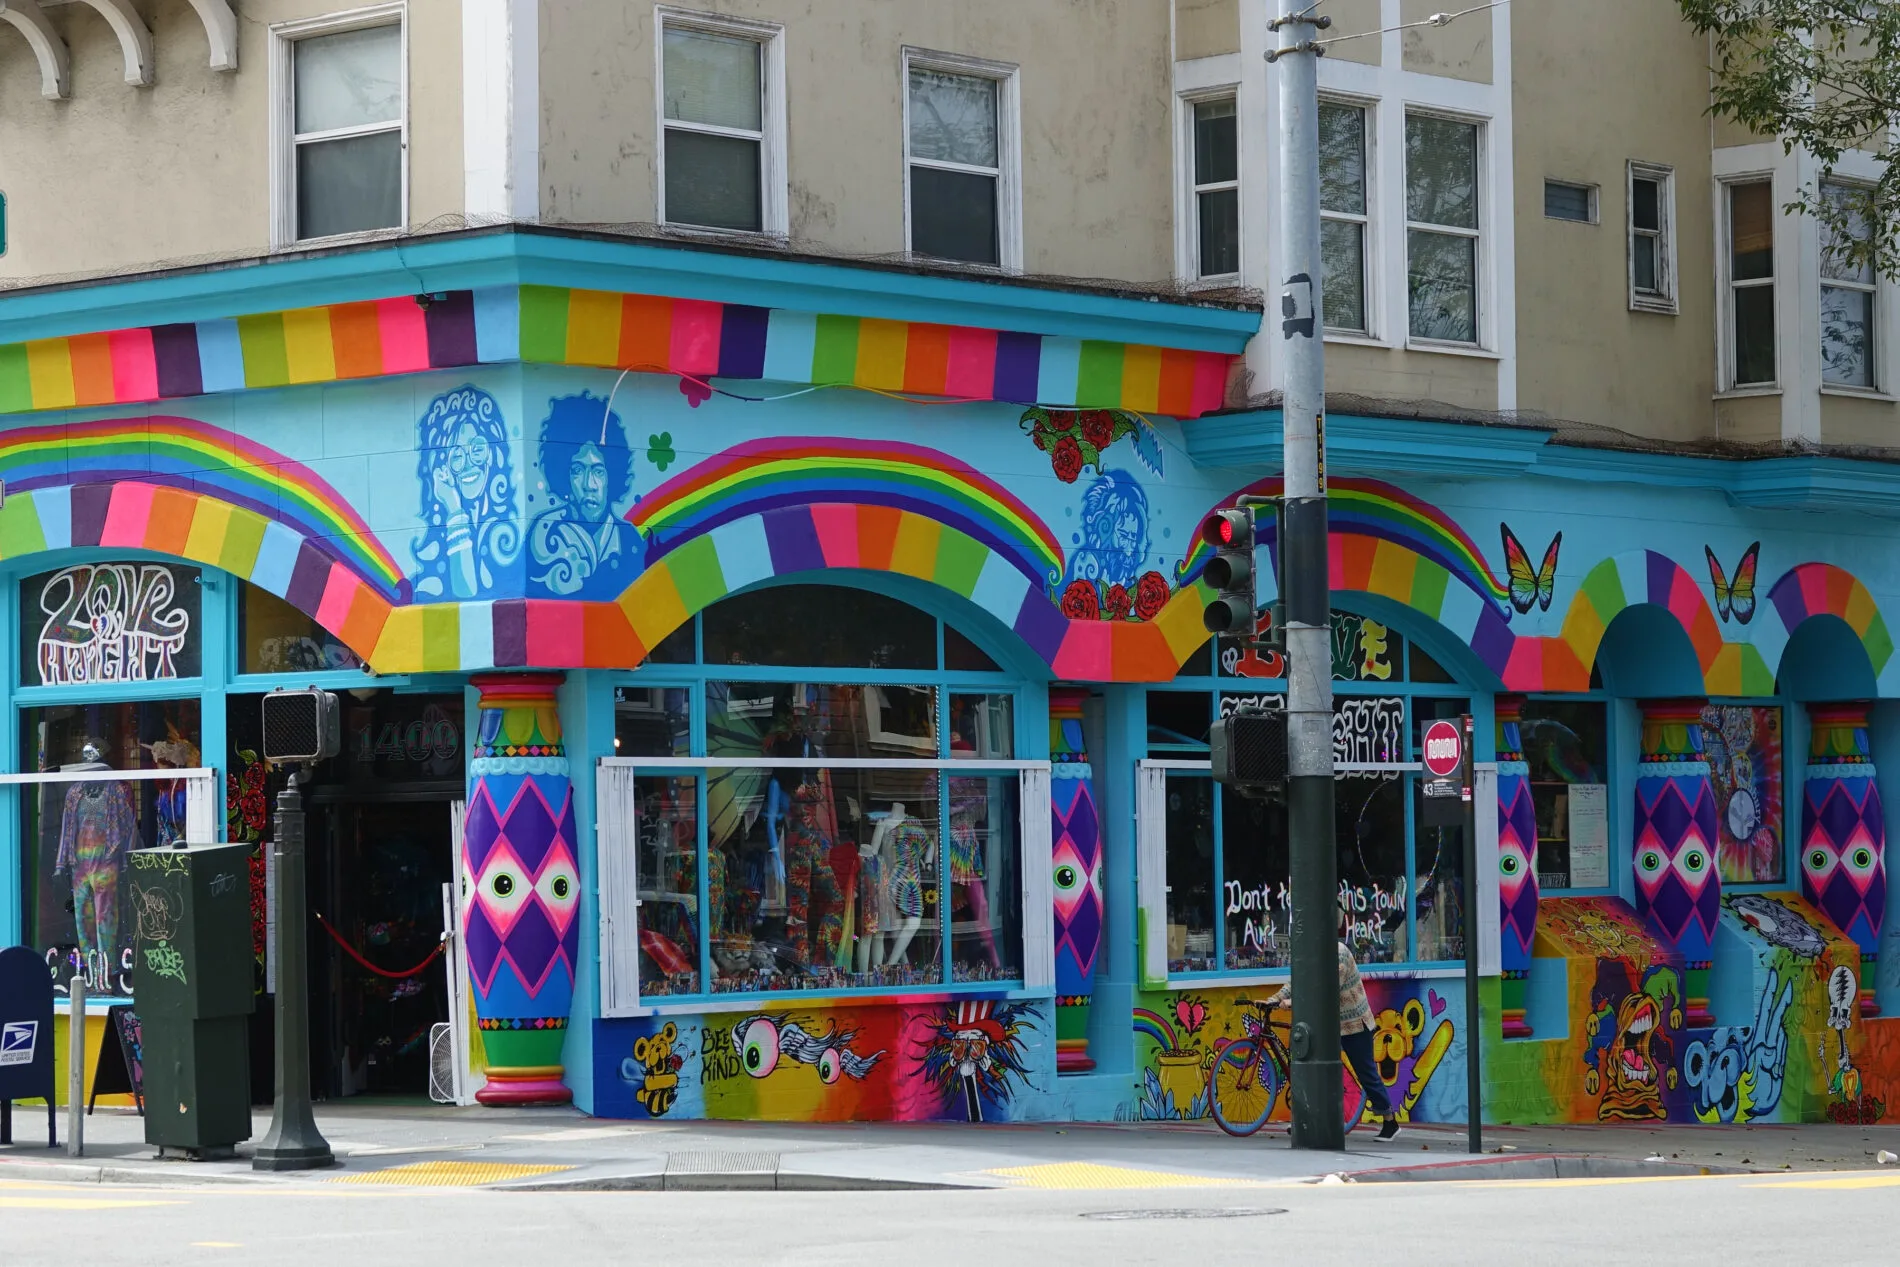 Store in Haight-Ashbury, San Francisco painted with bright, psychedelic colors and designs.